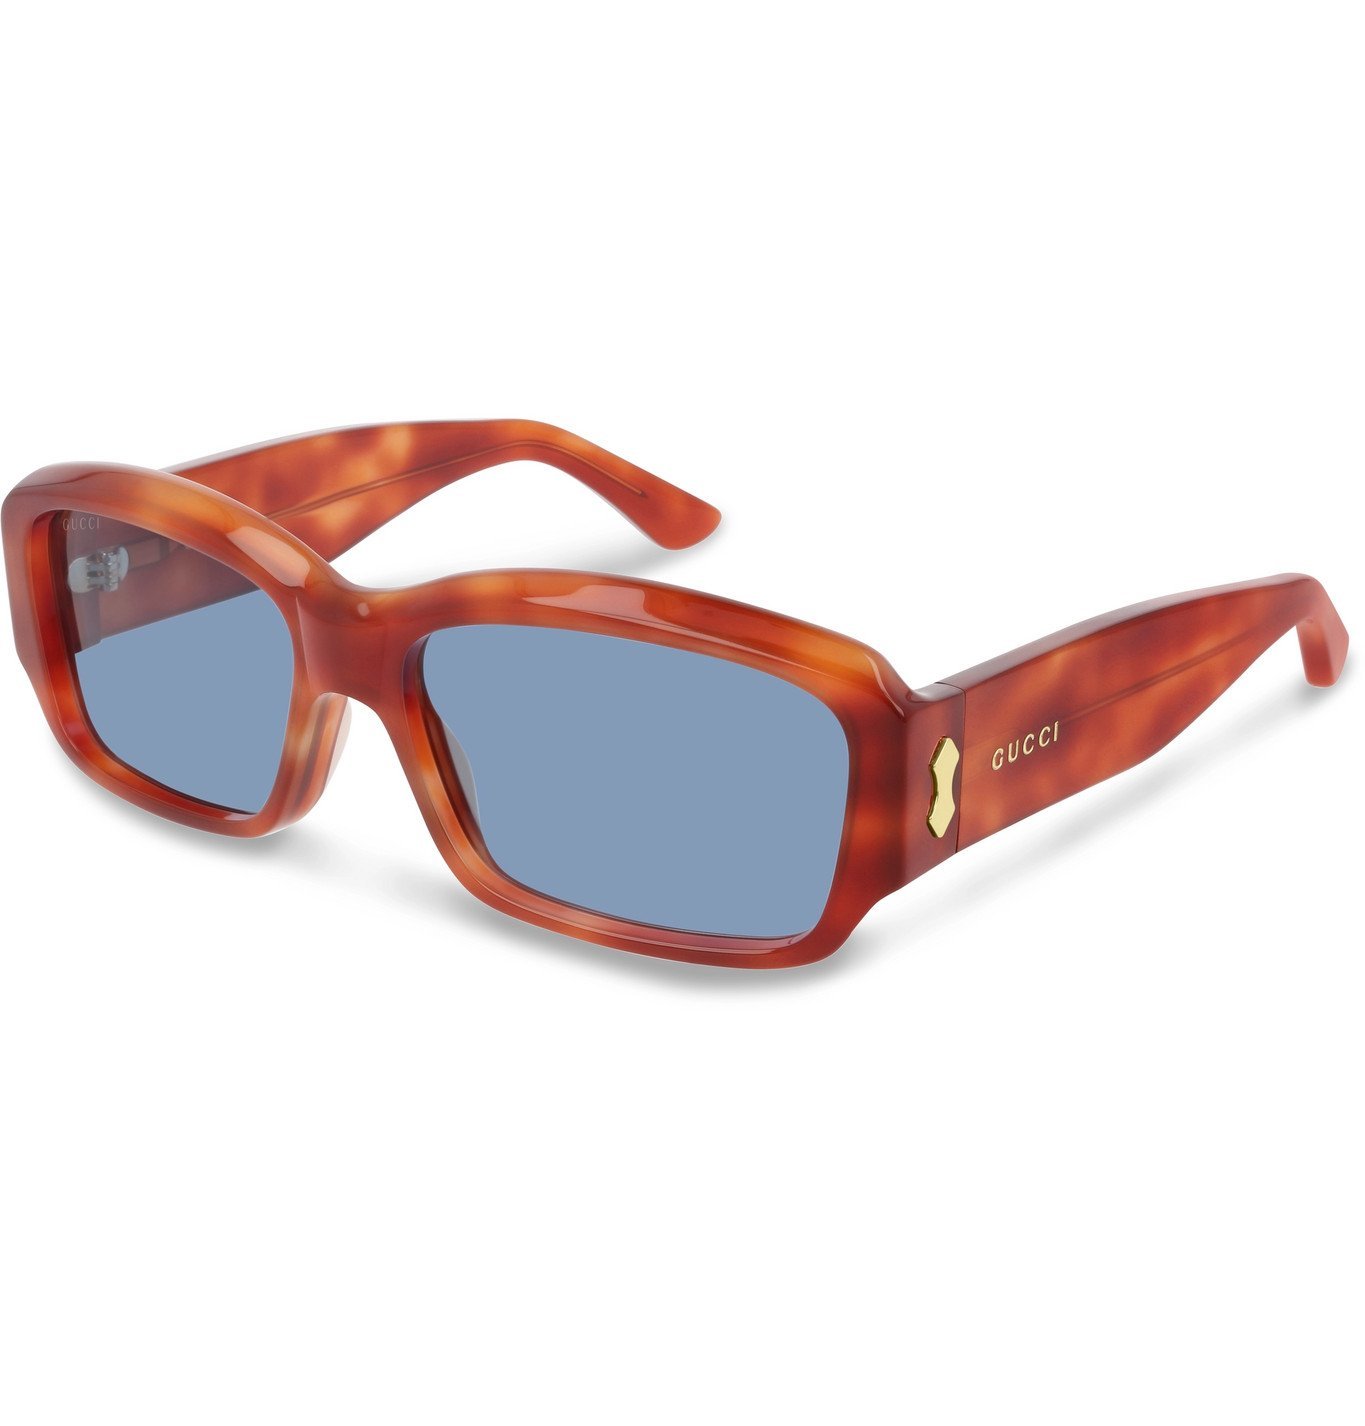 gucci sunglasses red frame